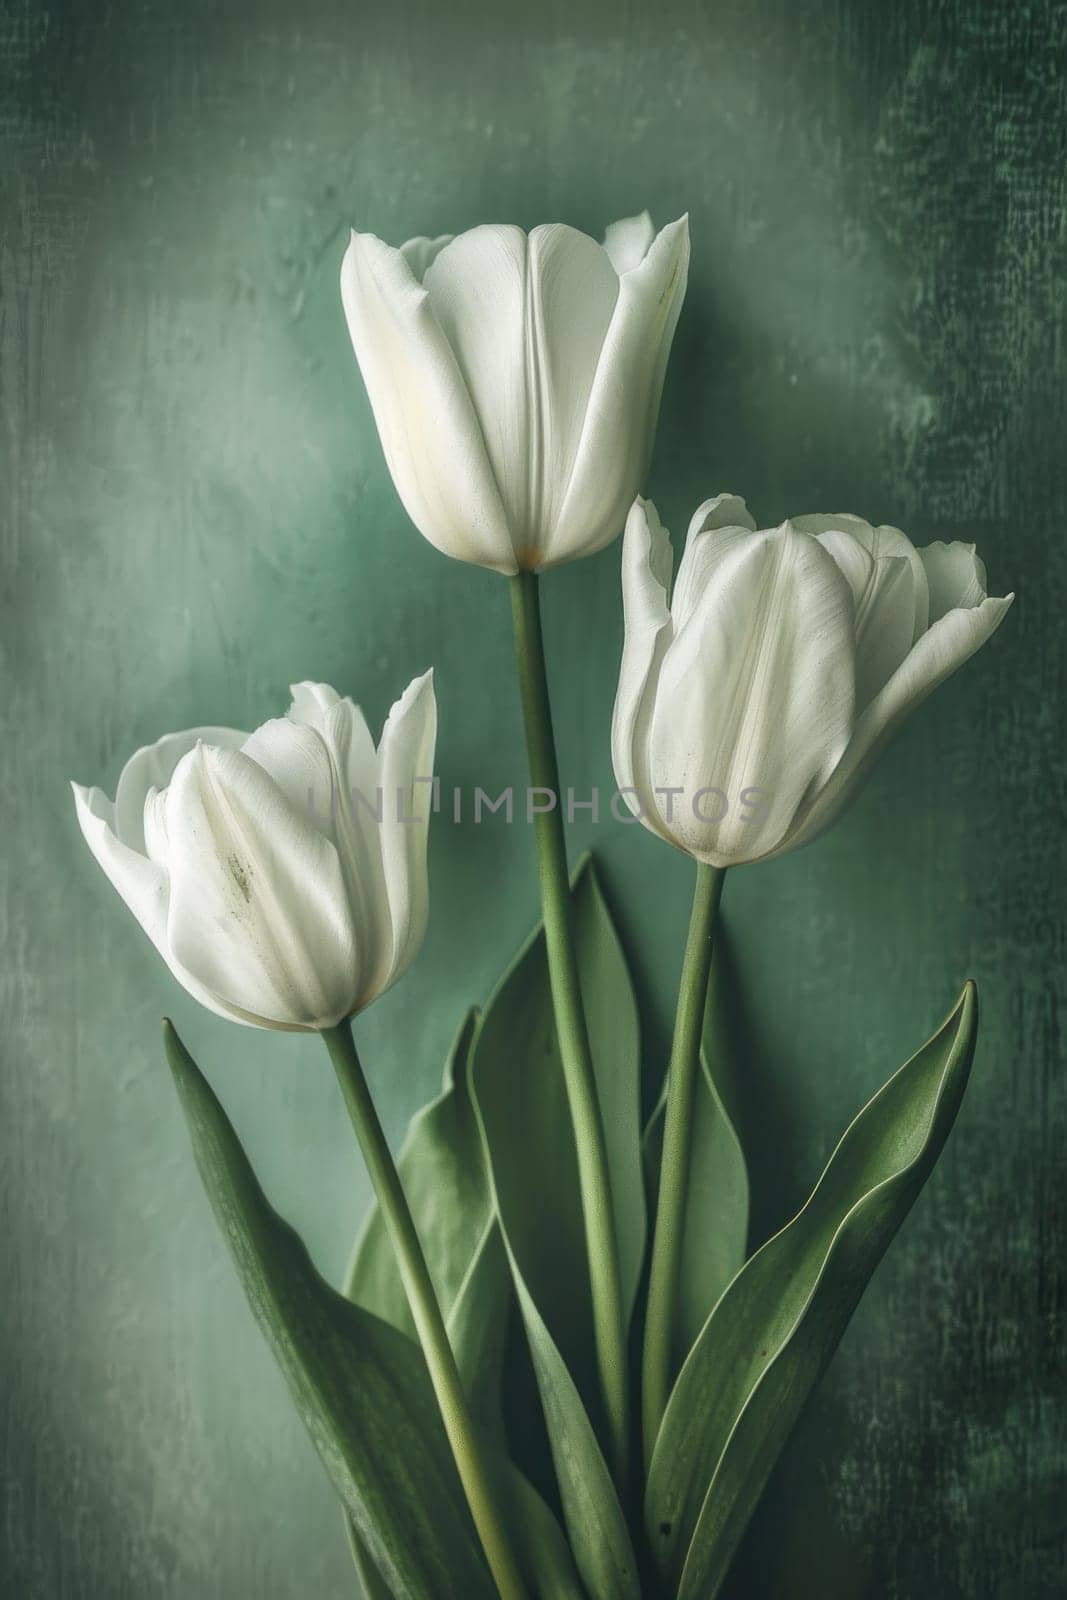 Spring blossoms three elegant white tulips in a vibrant green background symbolizing beauty and renewal